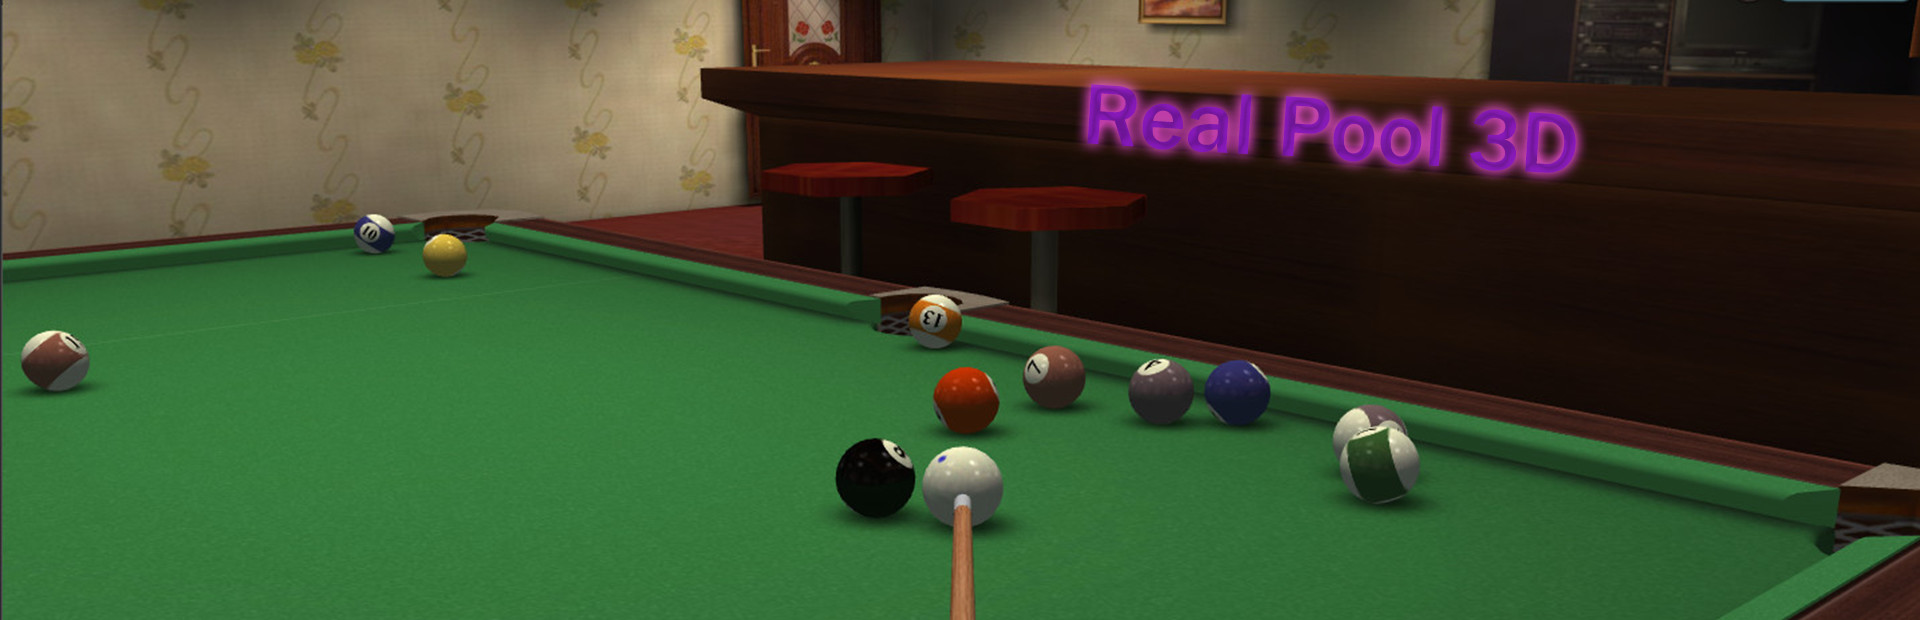 Real Pool 3D - Poolians cover image